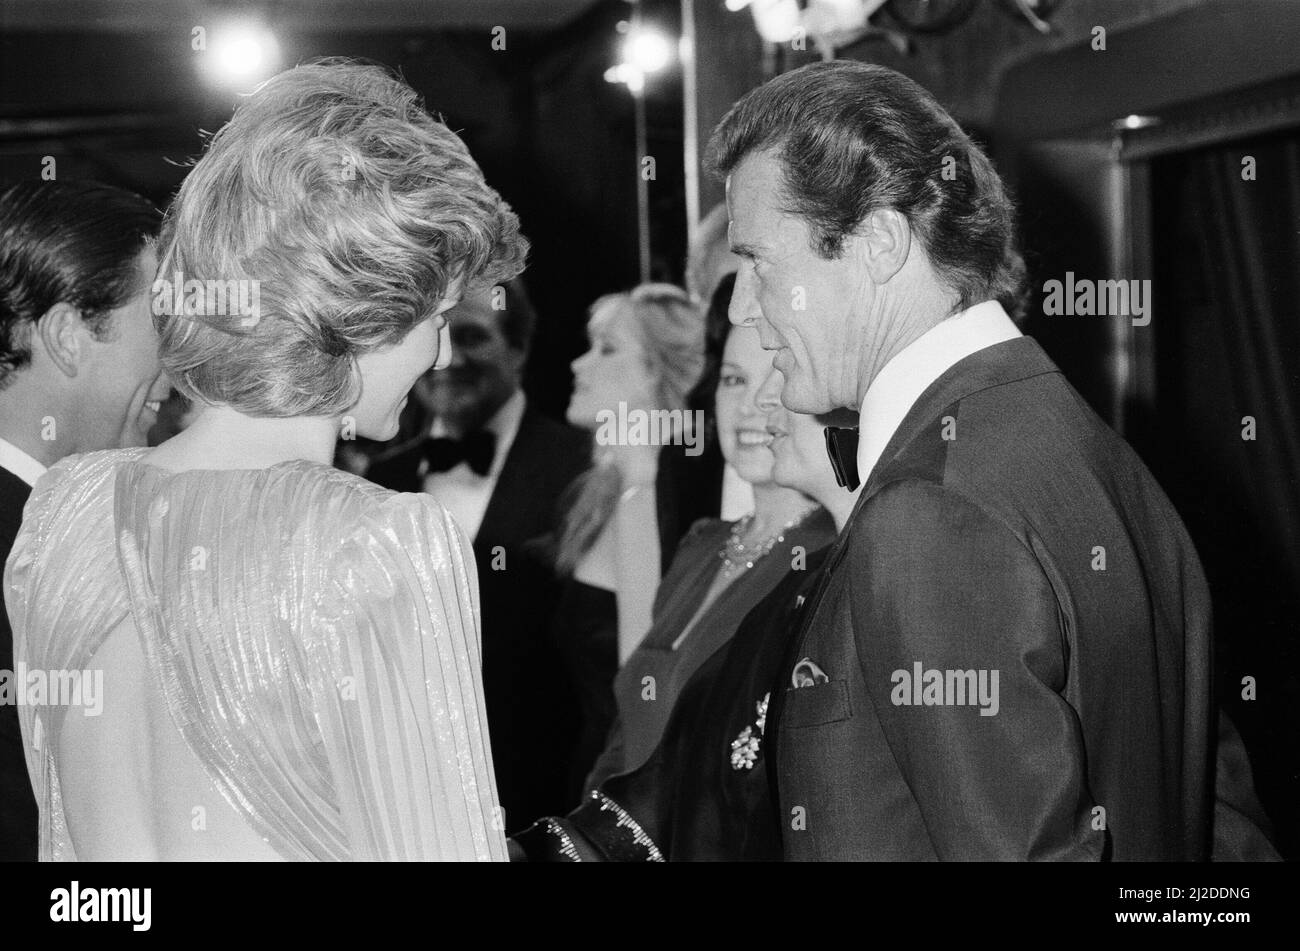 HRH The Princess of Wales, Princess Diana talking with lead actor Roger Moore at The Royal Premiere of the 14th 007 James Bond Movie, 'A View To A Kill'  at the Odeon Cinema, Leicester Square, London. This was Roger Moore's last of seven Bond Films. His first 'Live and Let Die', was released in 1973.  Princess Diana wears a stunning silver Bruce Oldfield dress.   In the background is actor Patrick Macnee, who plays Sir Godfrey Tibbett in the film.  Picture taken 14th June 1985 Stock Photo